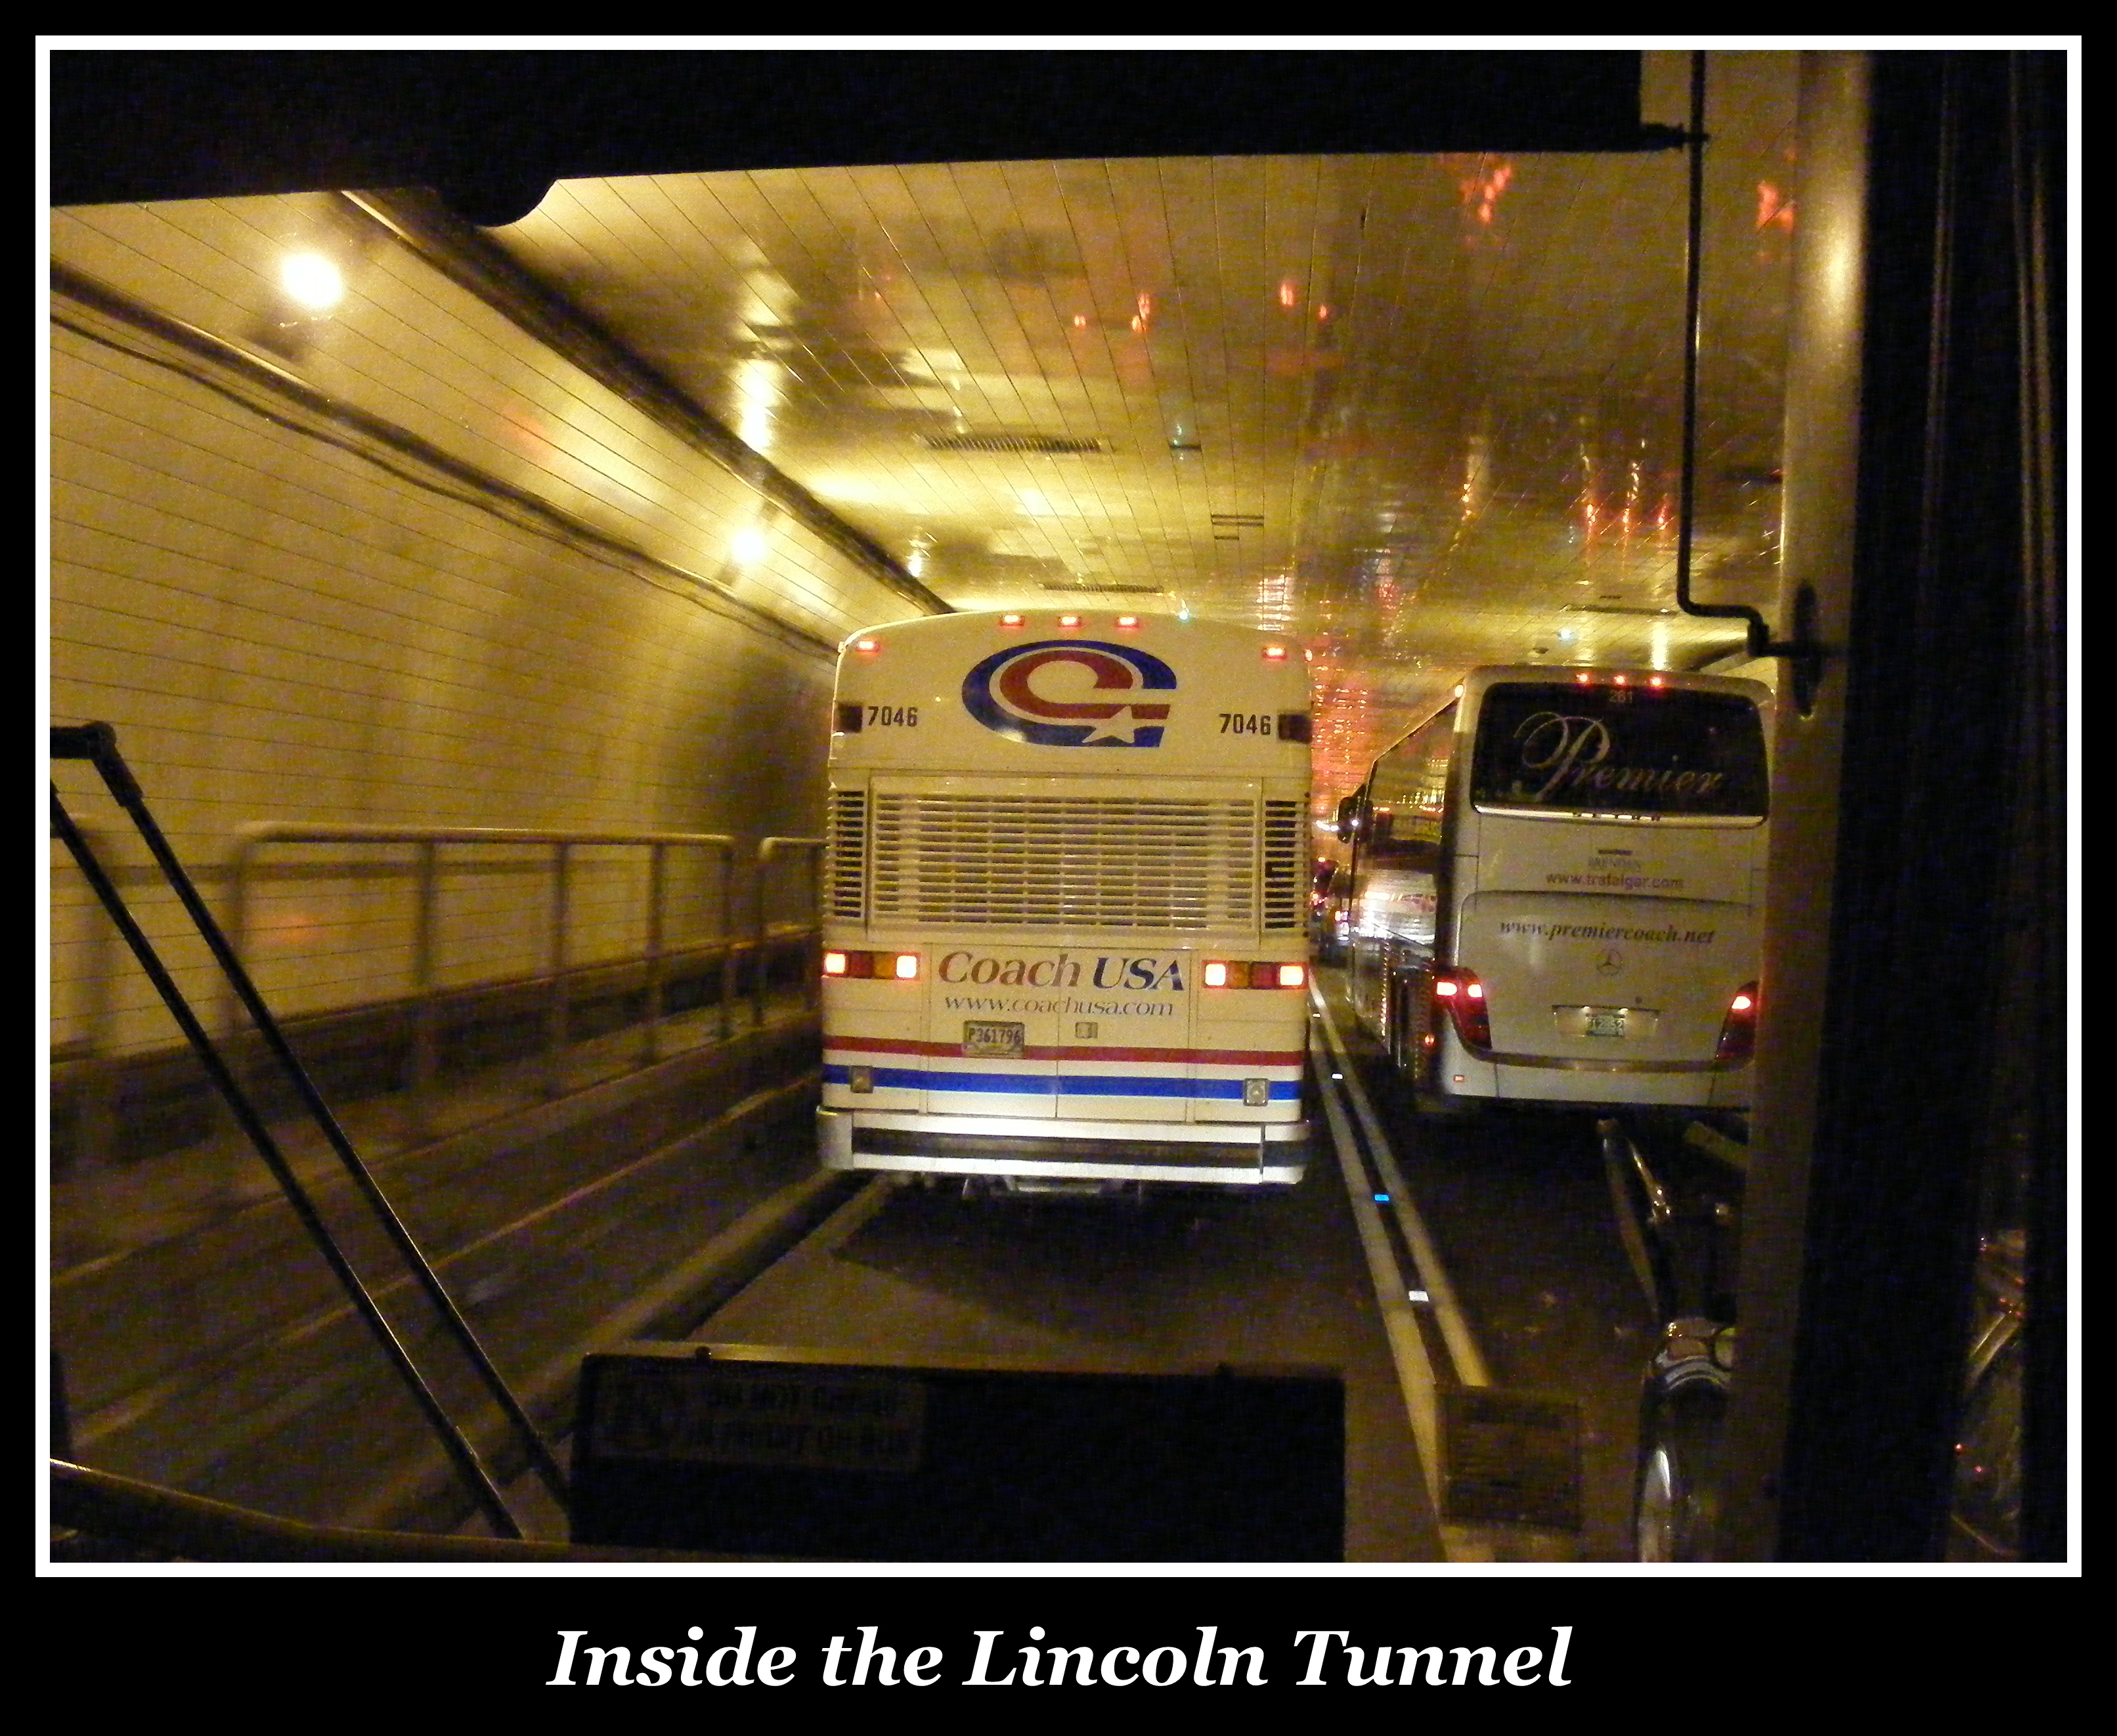 Inside the Lincoln Tunnel - photo by Anthony Buccino